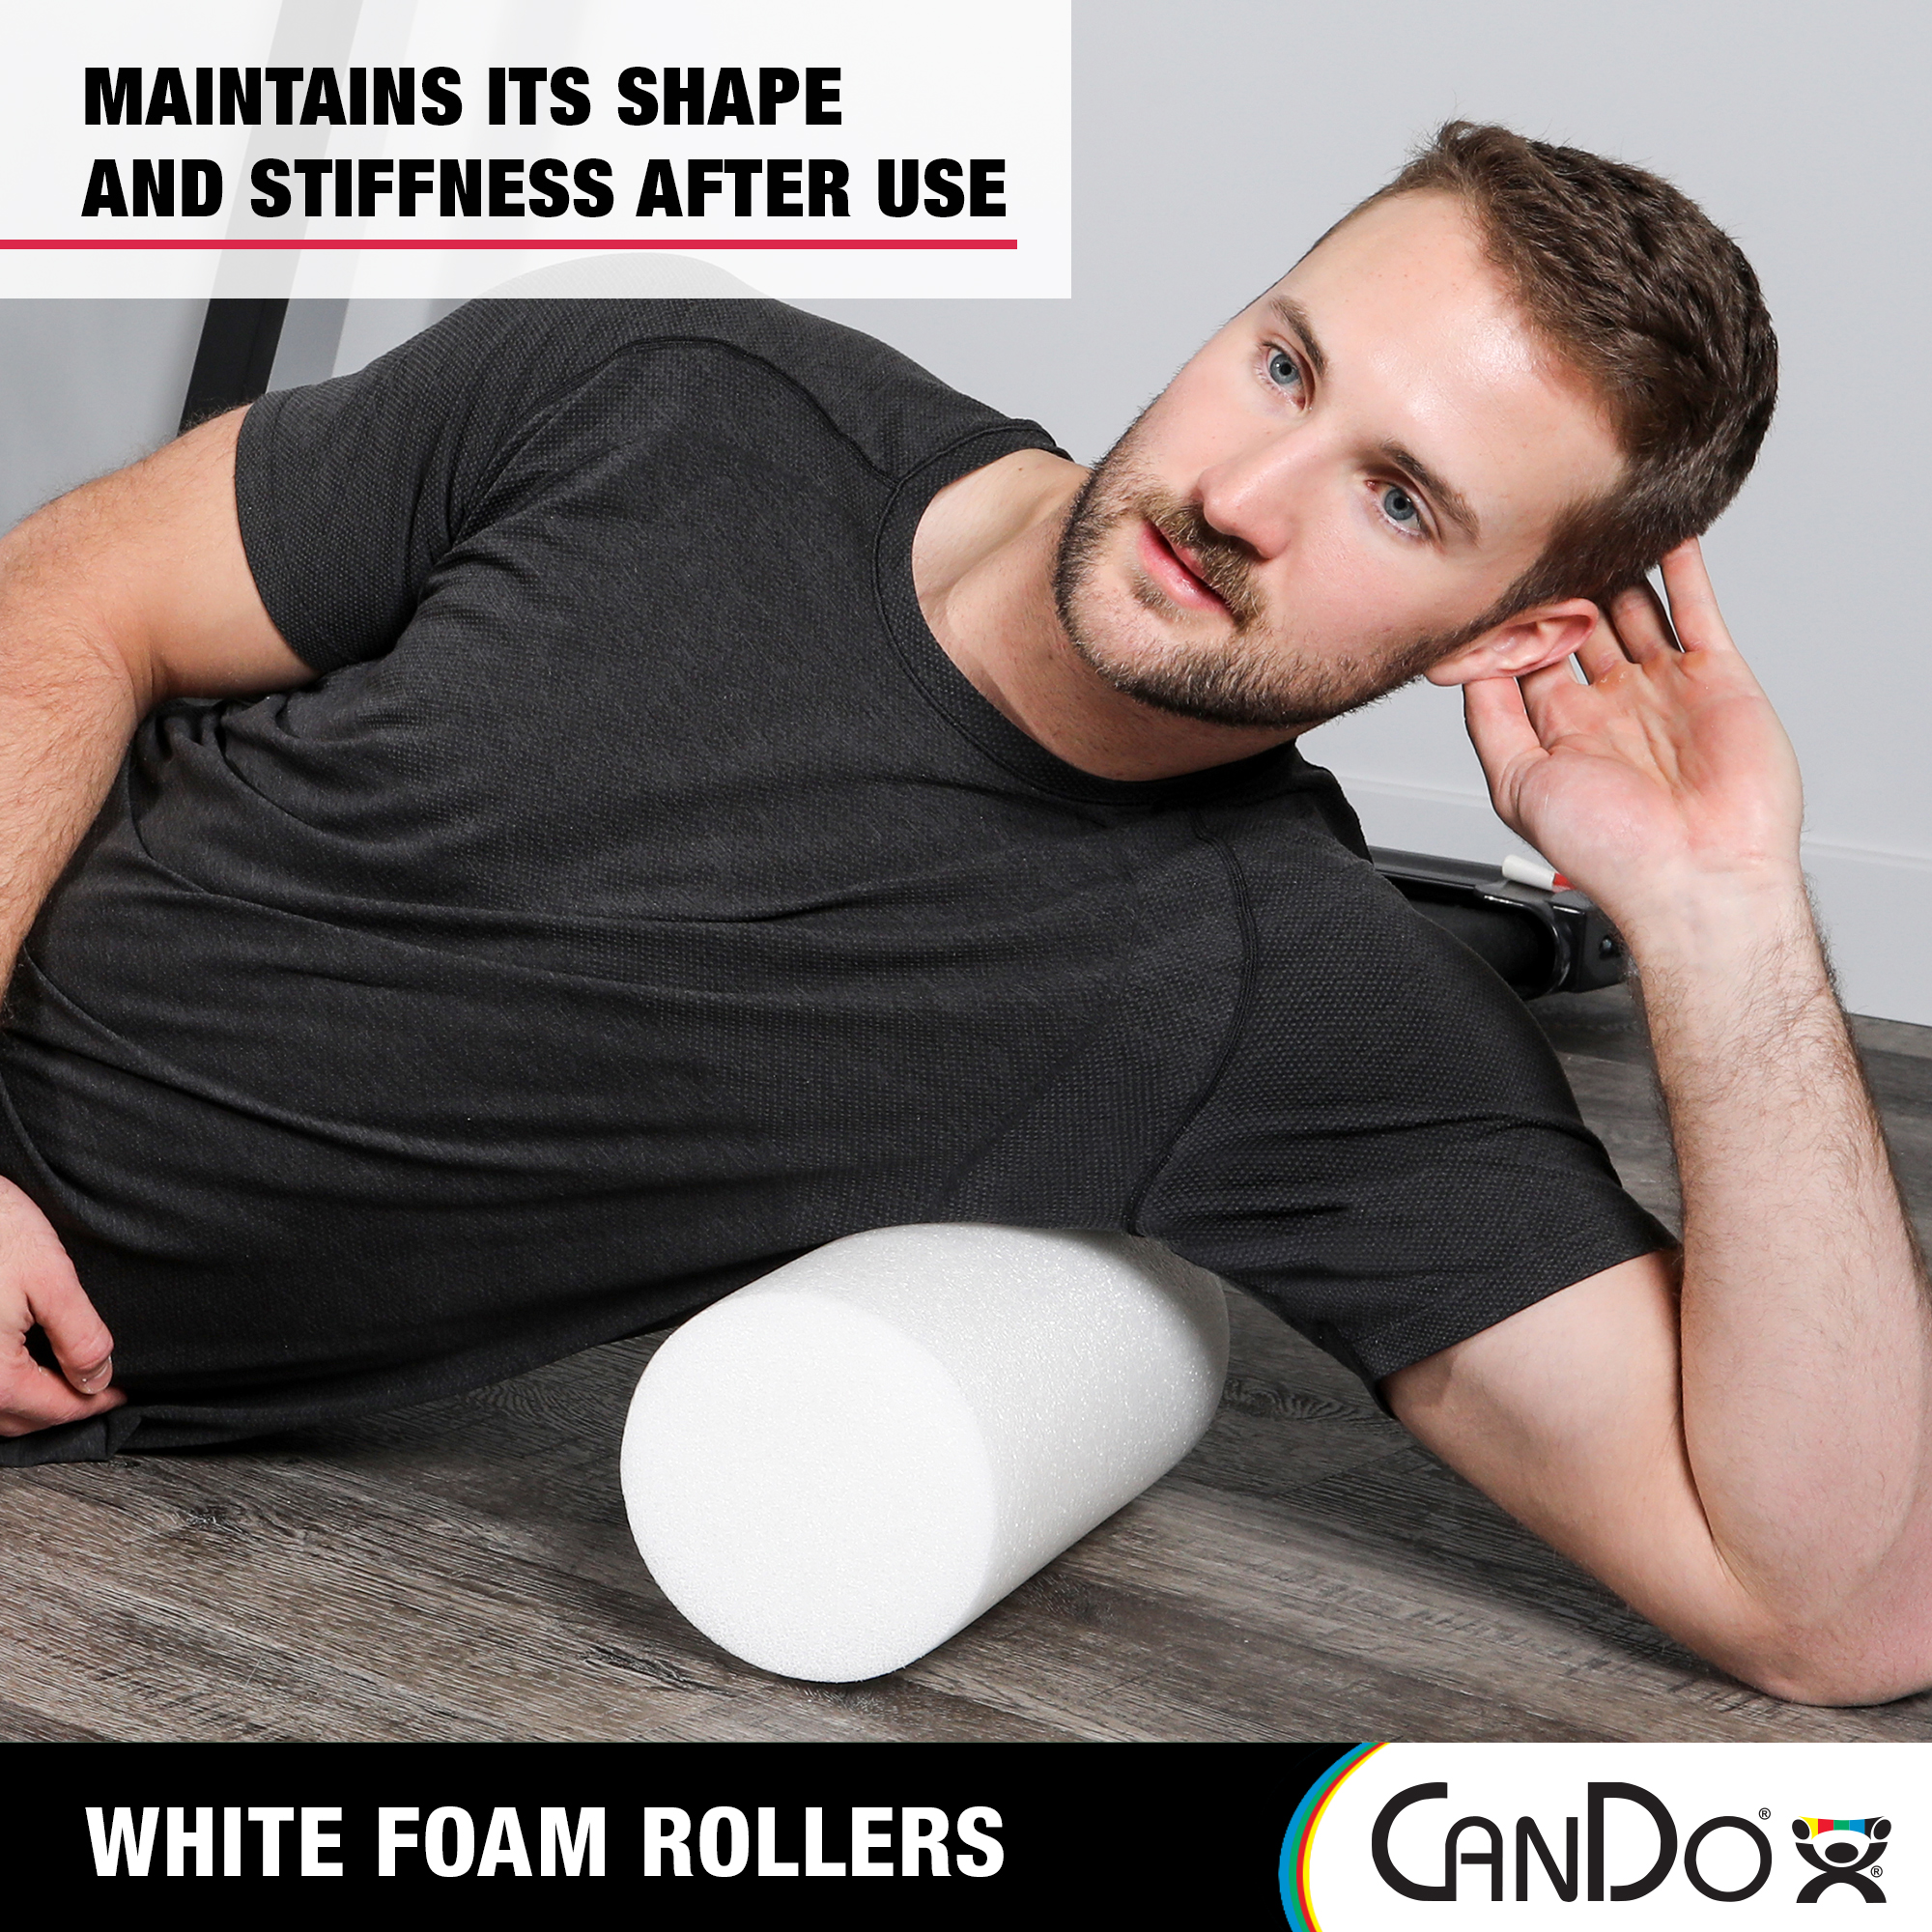 CanDo White PE Foam Rollers for Exercise, Finess, Muscle Restoration, Massage Therapy, Sport Recovery and Physical Therapy for Home, Clinics, Professional Therapy Round 6" x 36" - image 5 of 6